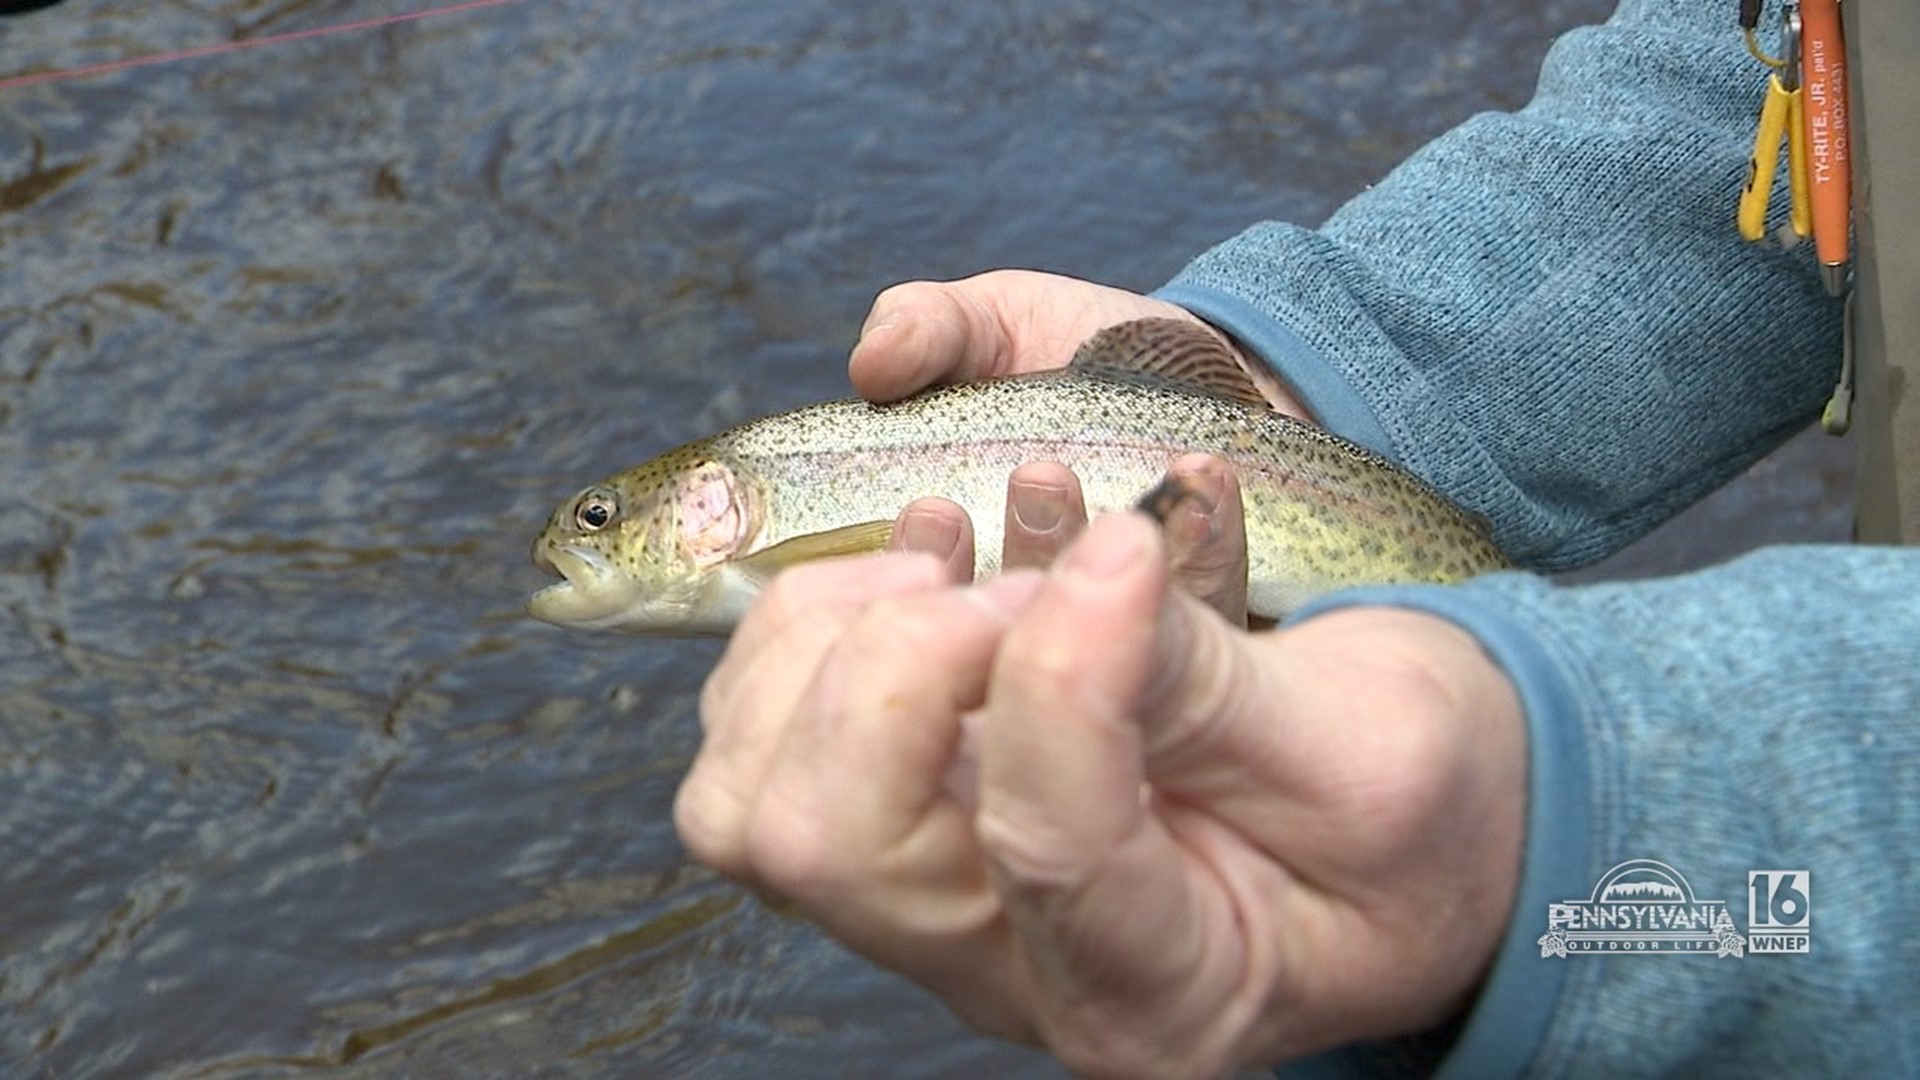 Fly fishing in high water conditions.